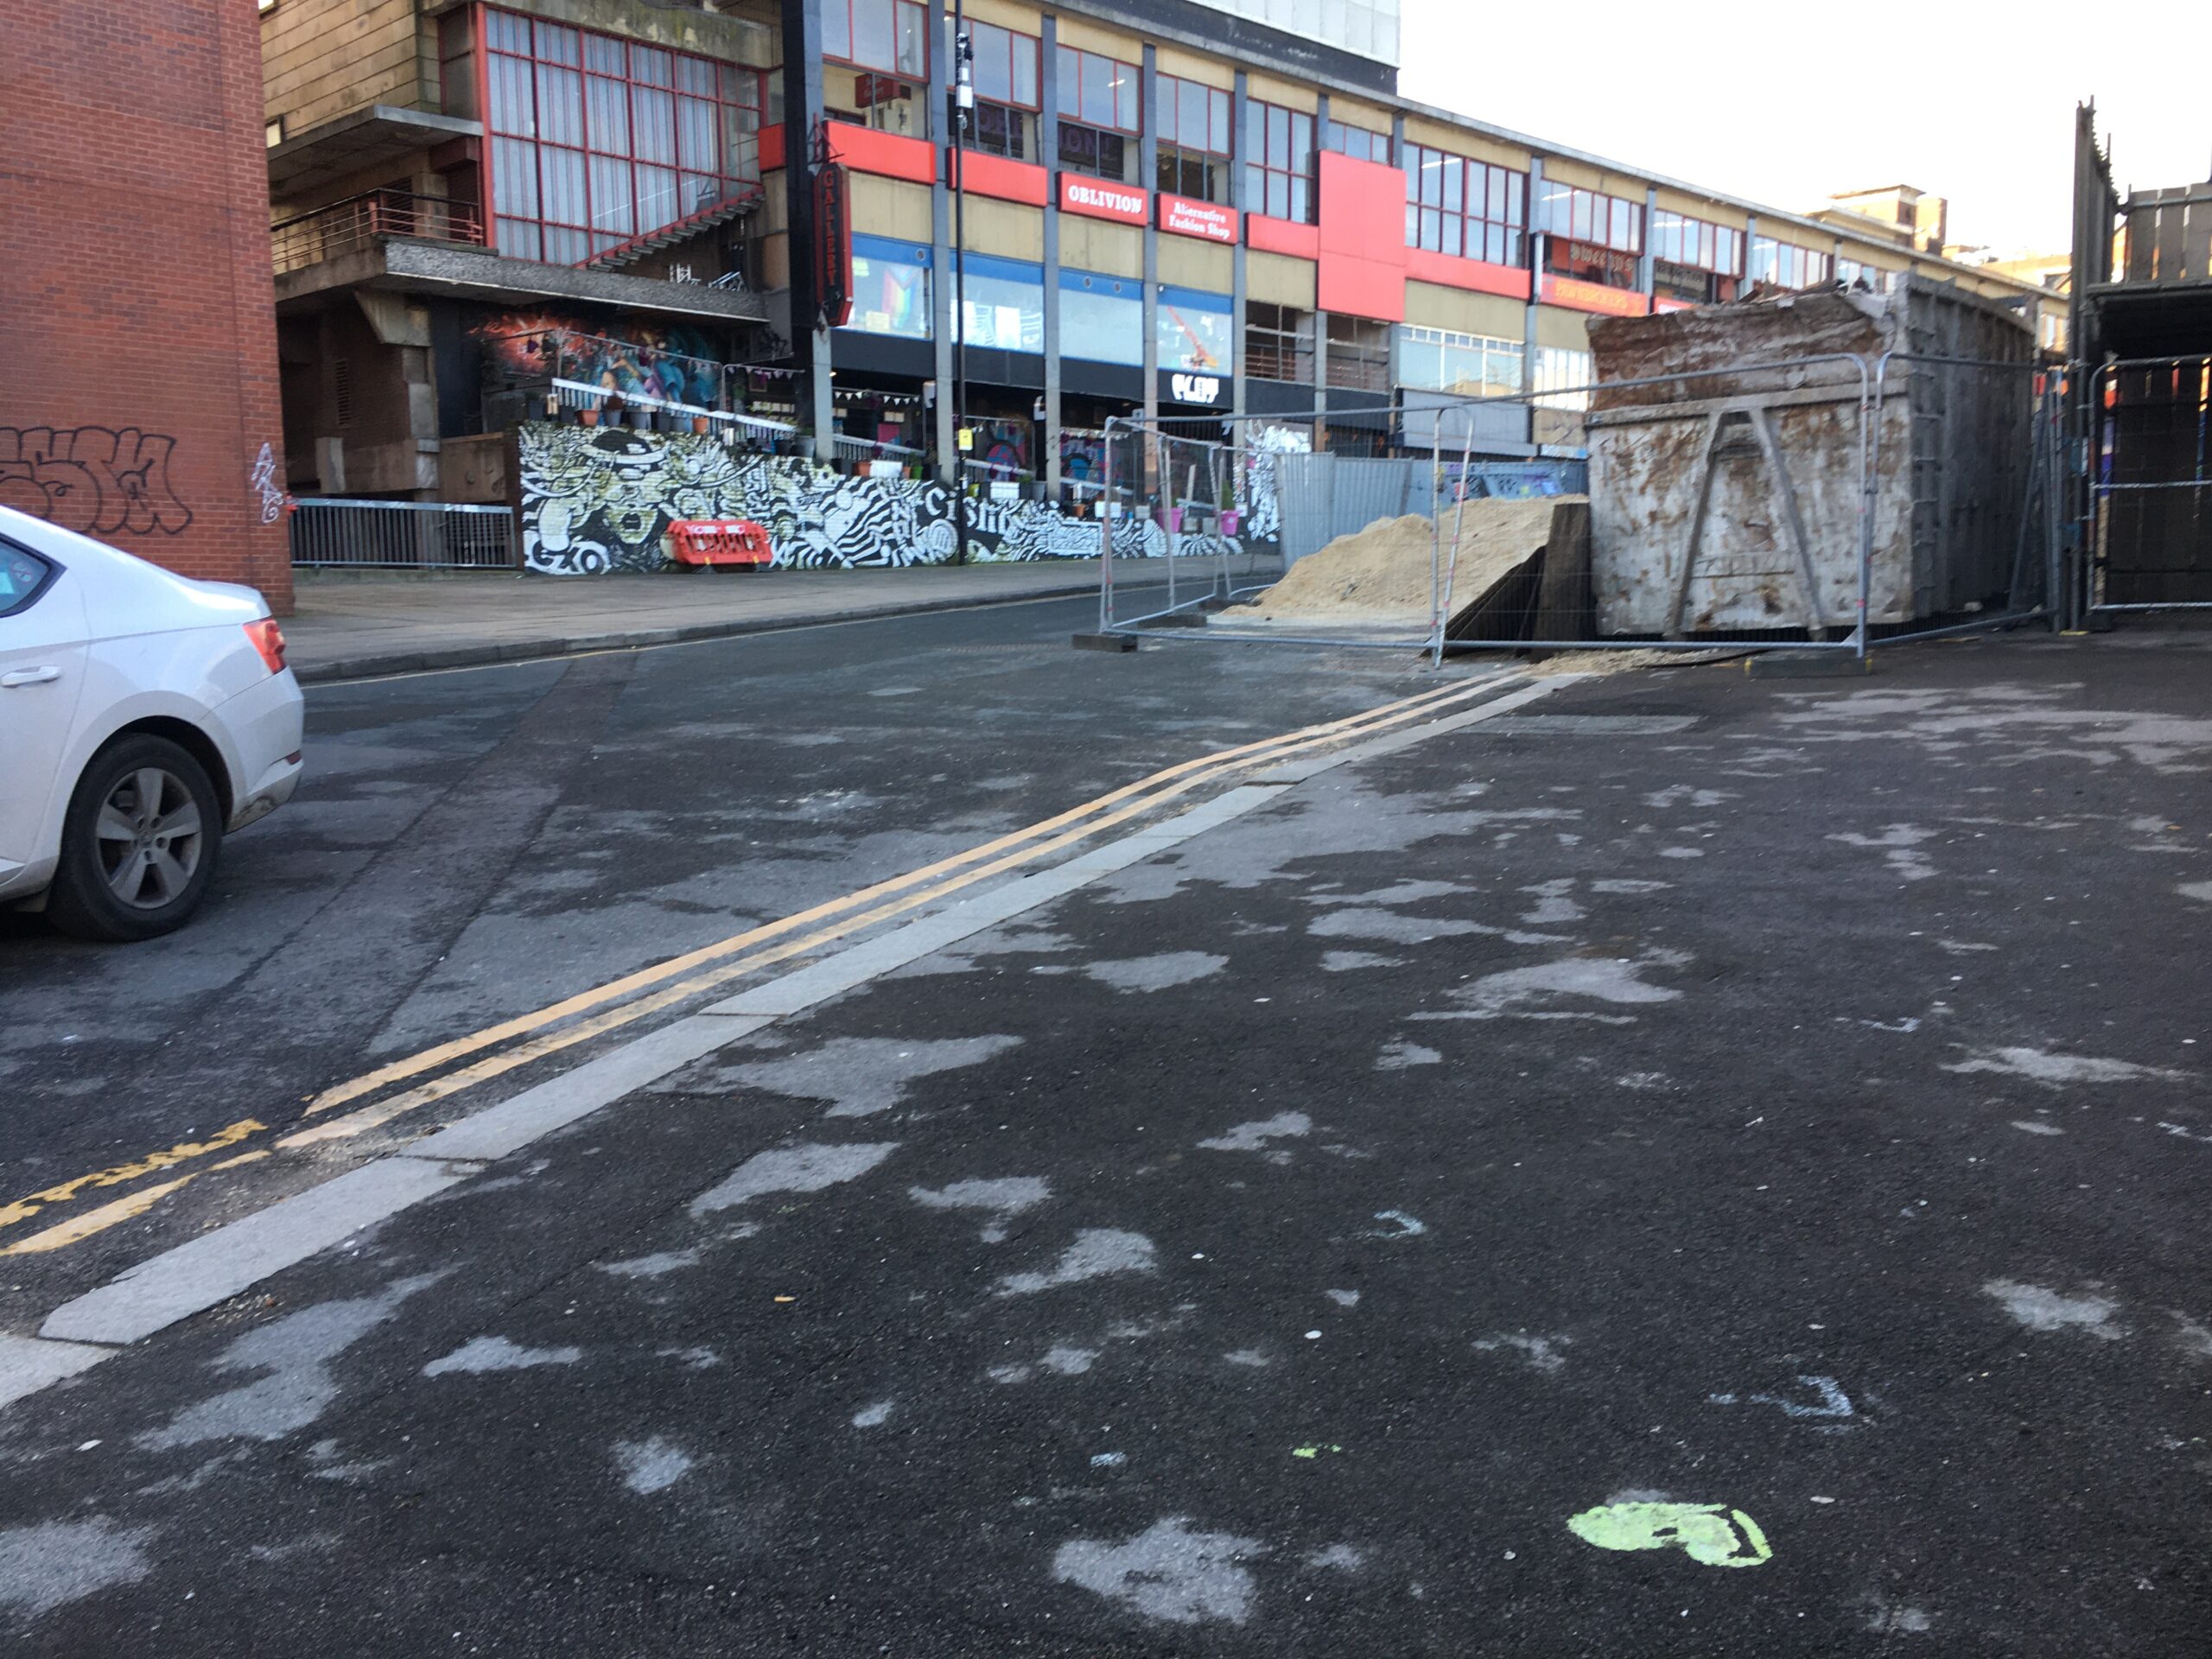 A city centre road. Photo taken from the right hand pavement looking up a significant slope. The right hand pavement is obstructed by a large skip and railings. There is a dropped kerb onto the carriageway, but no tactile paving. There is no dropped kerb to access the opposite pavement.